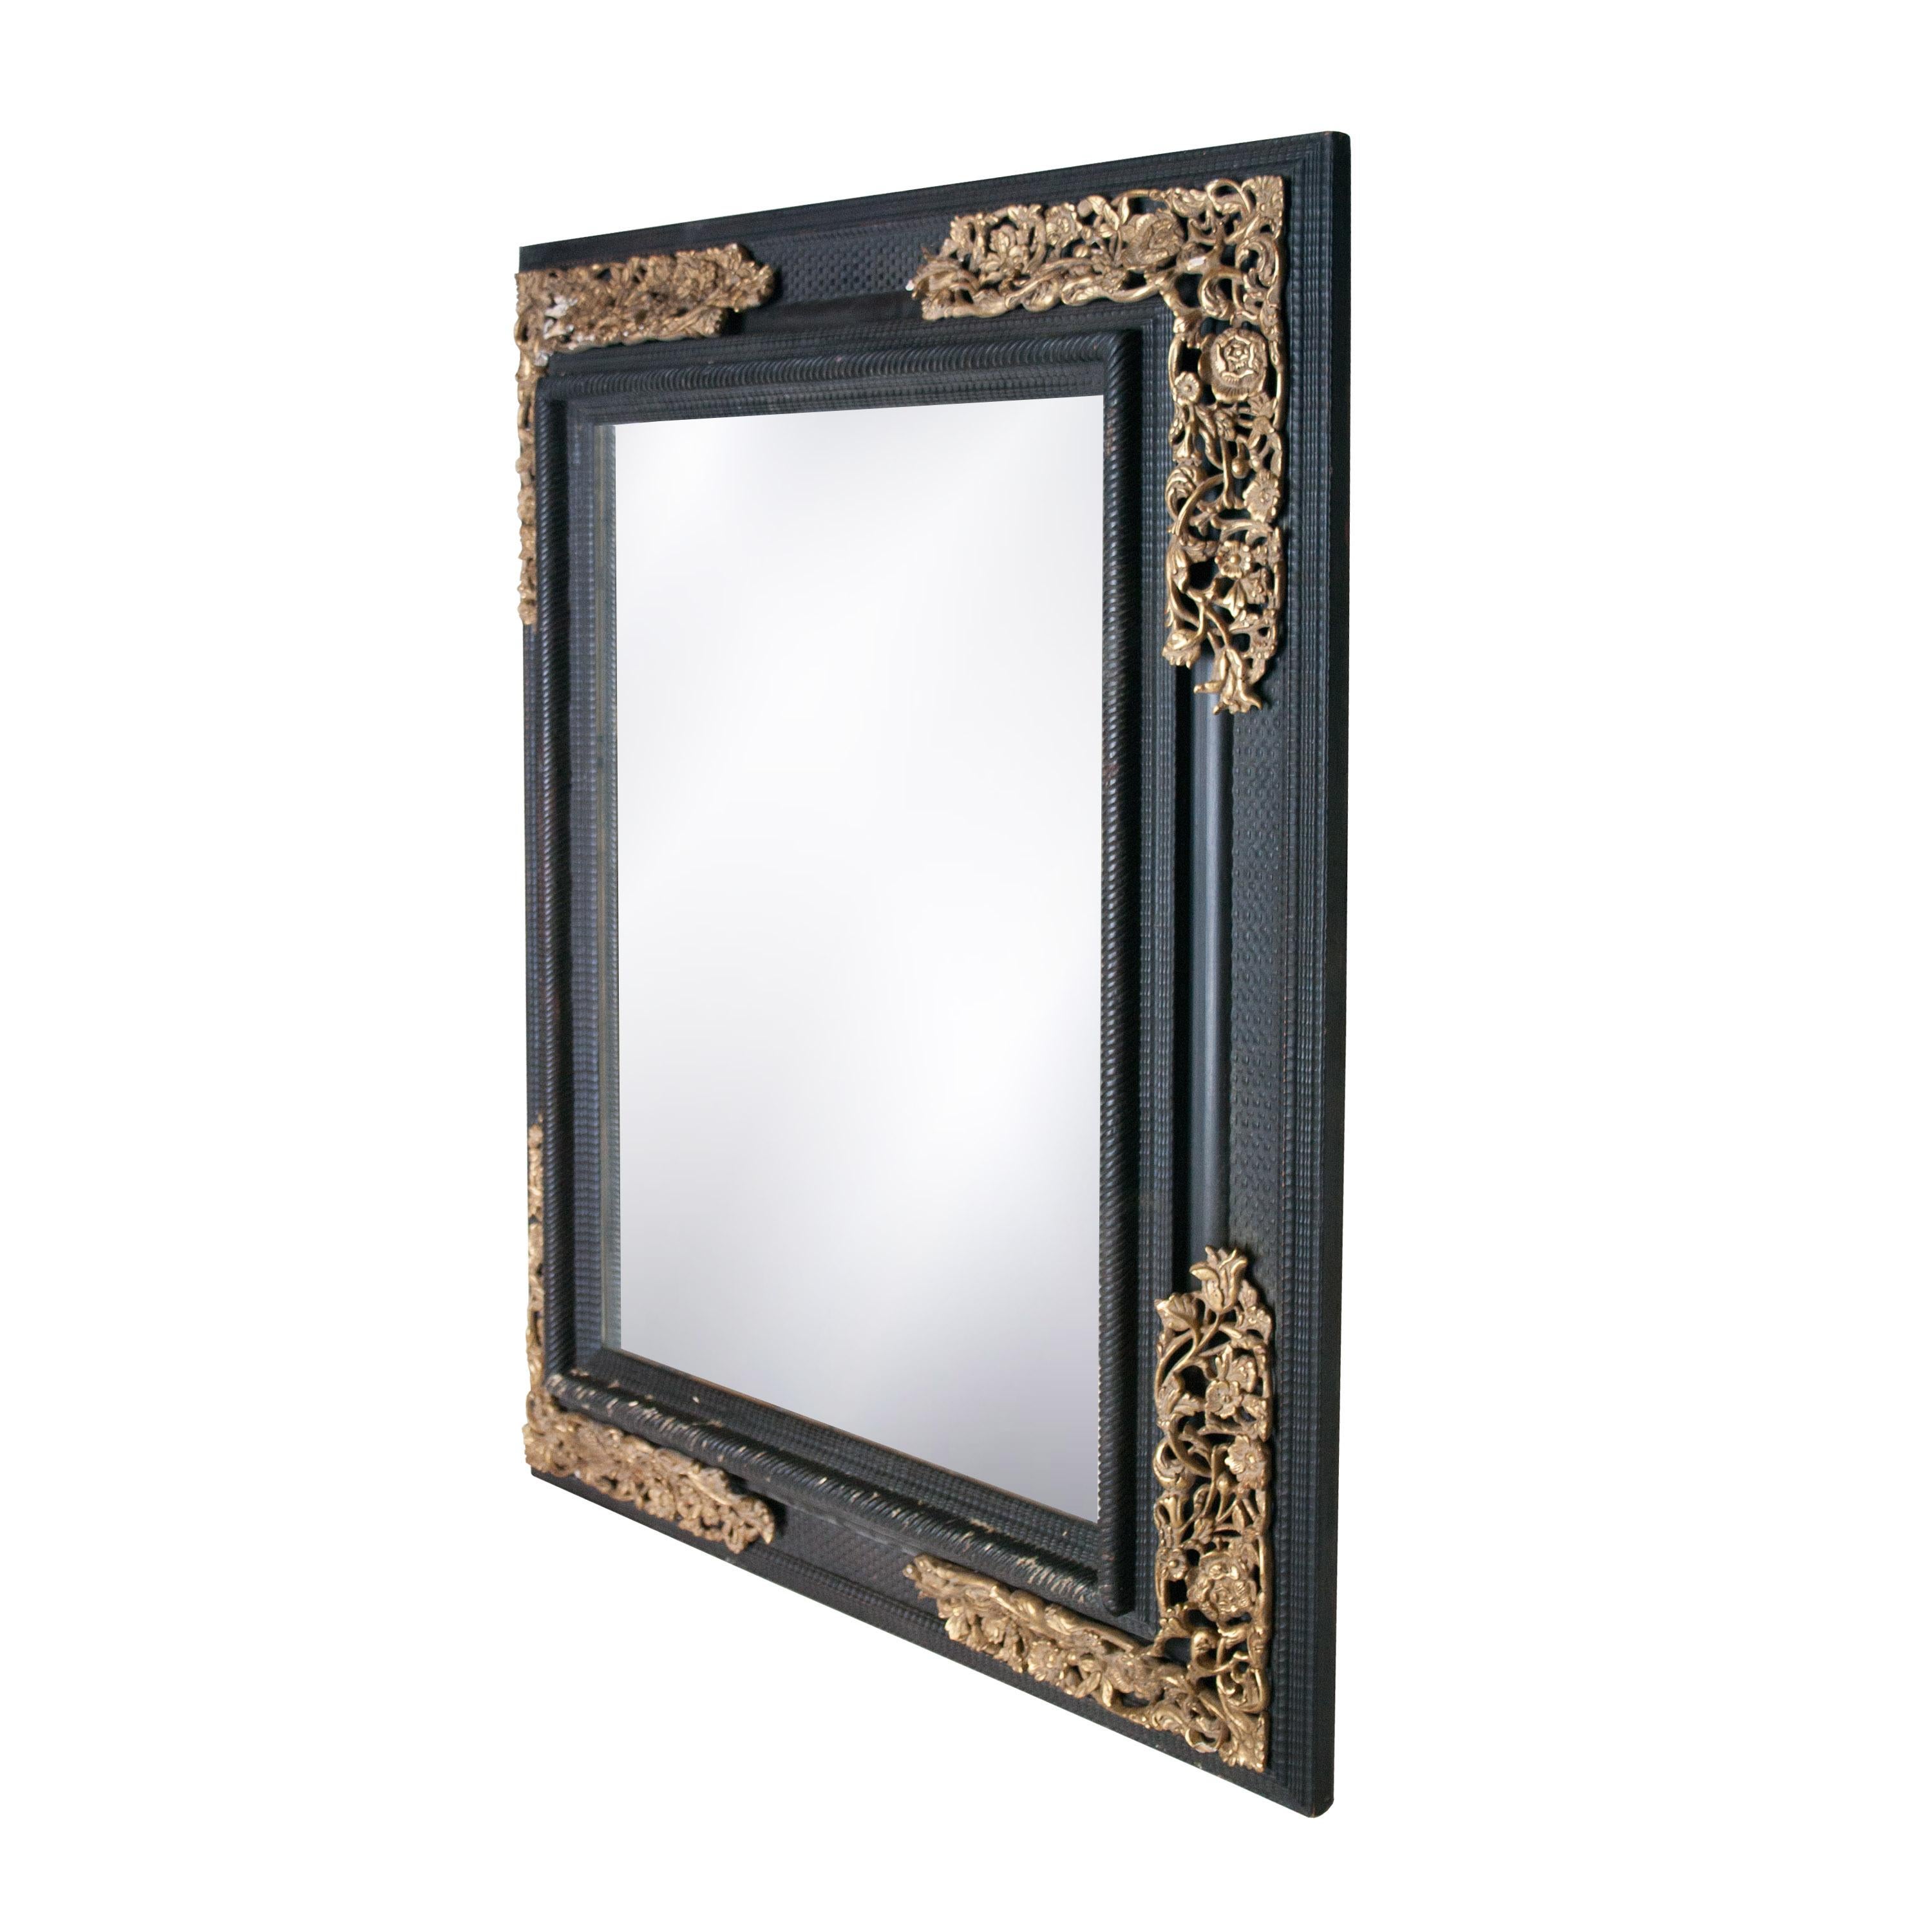 Handcrafted carved Regency style wooden mirror with black finish and gold foiled details.